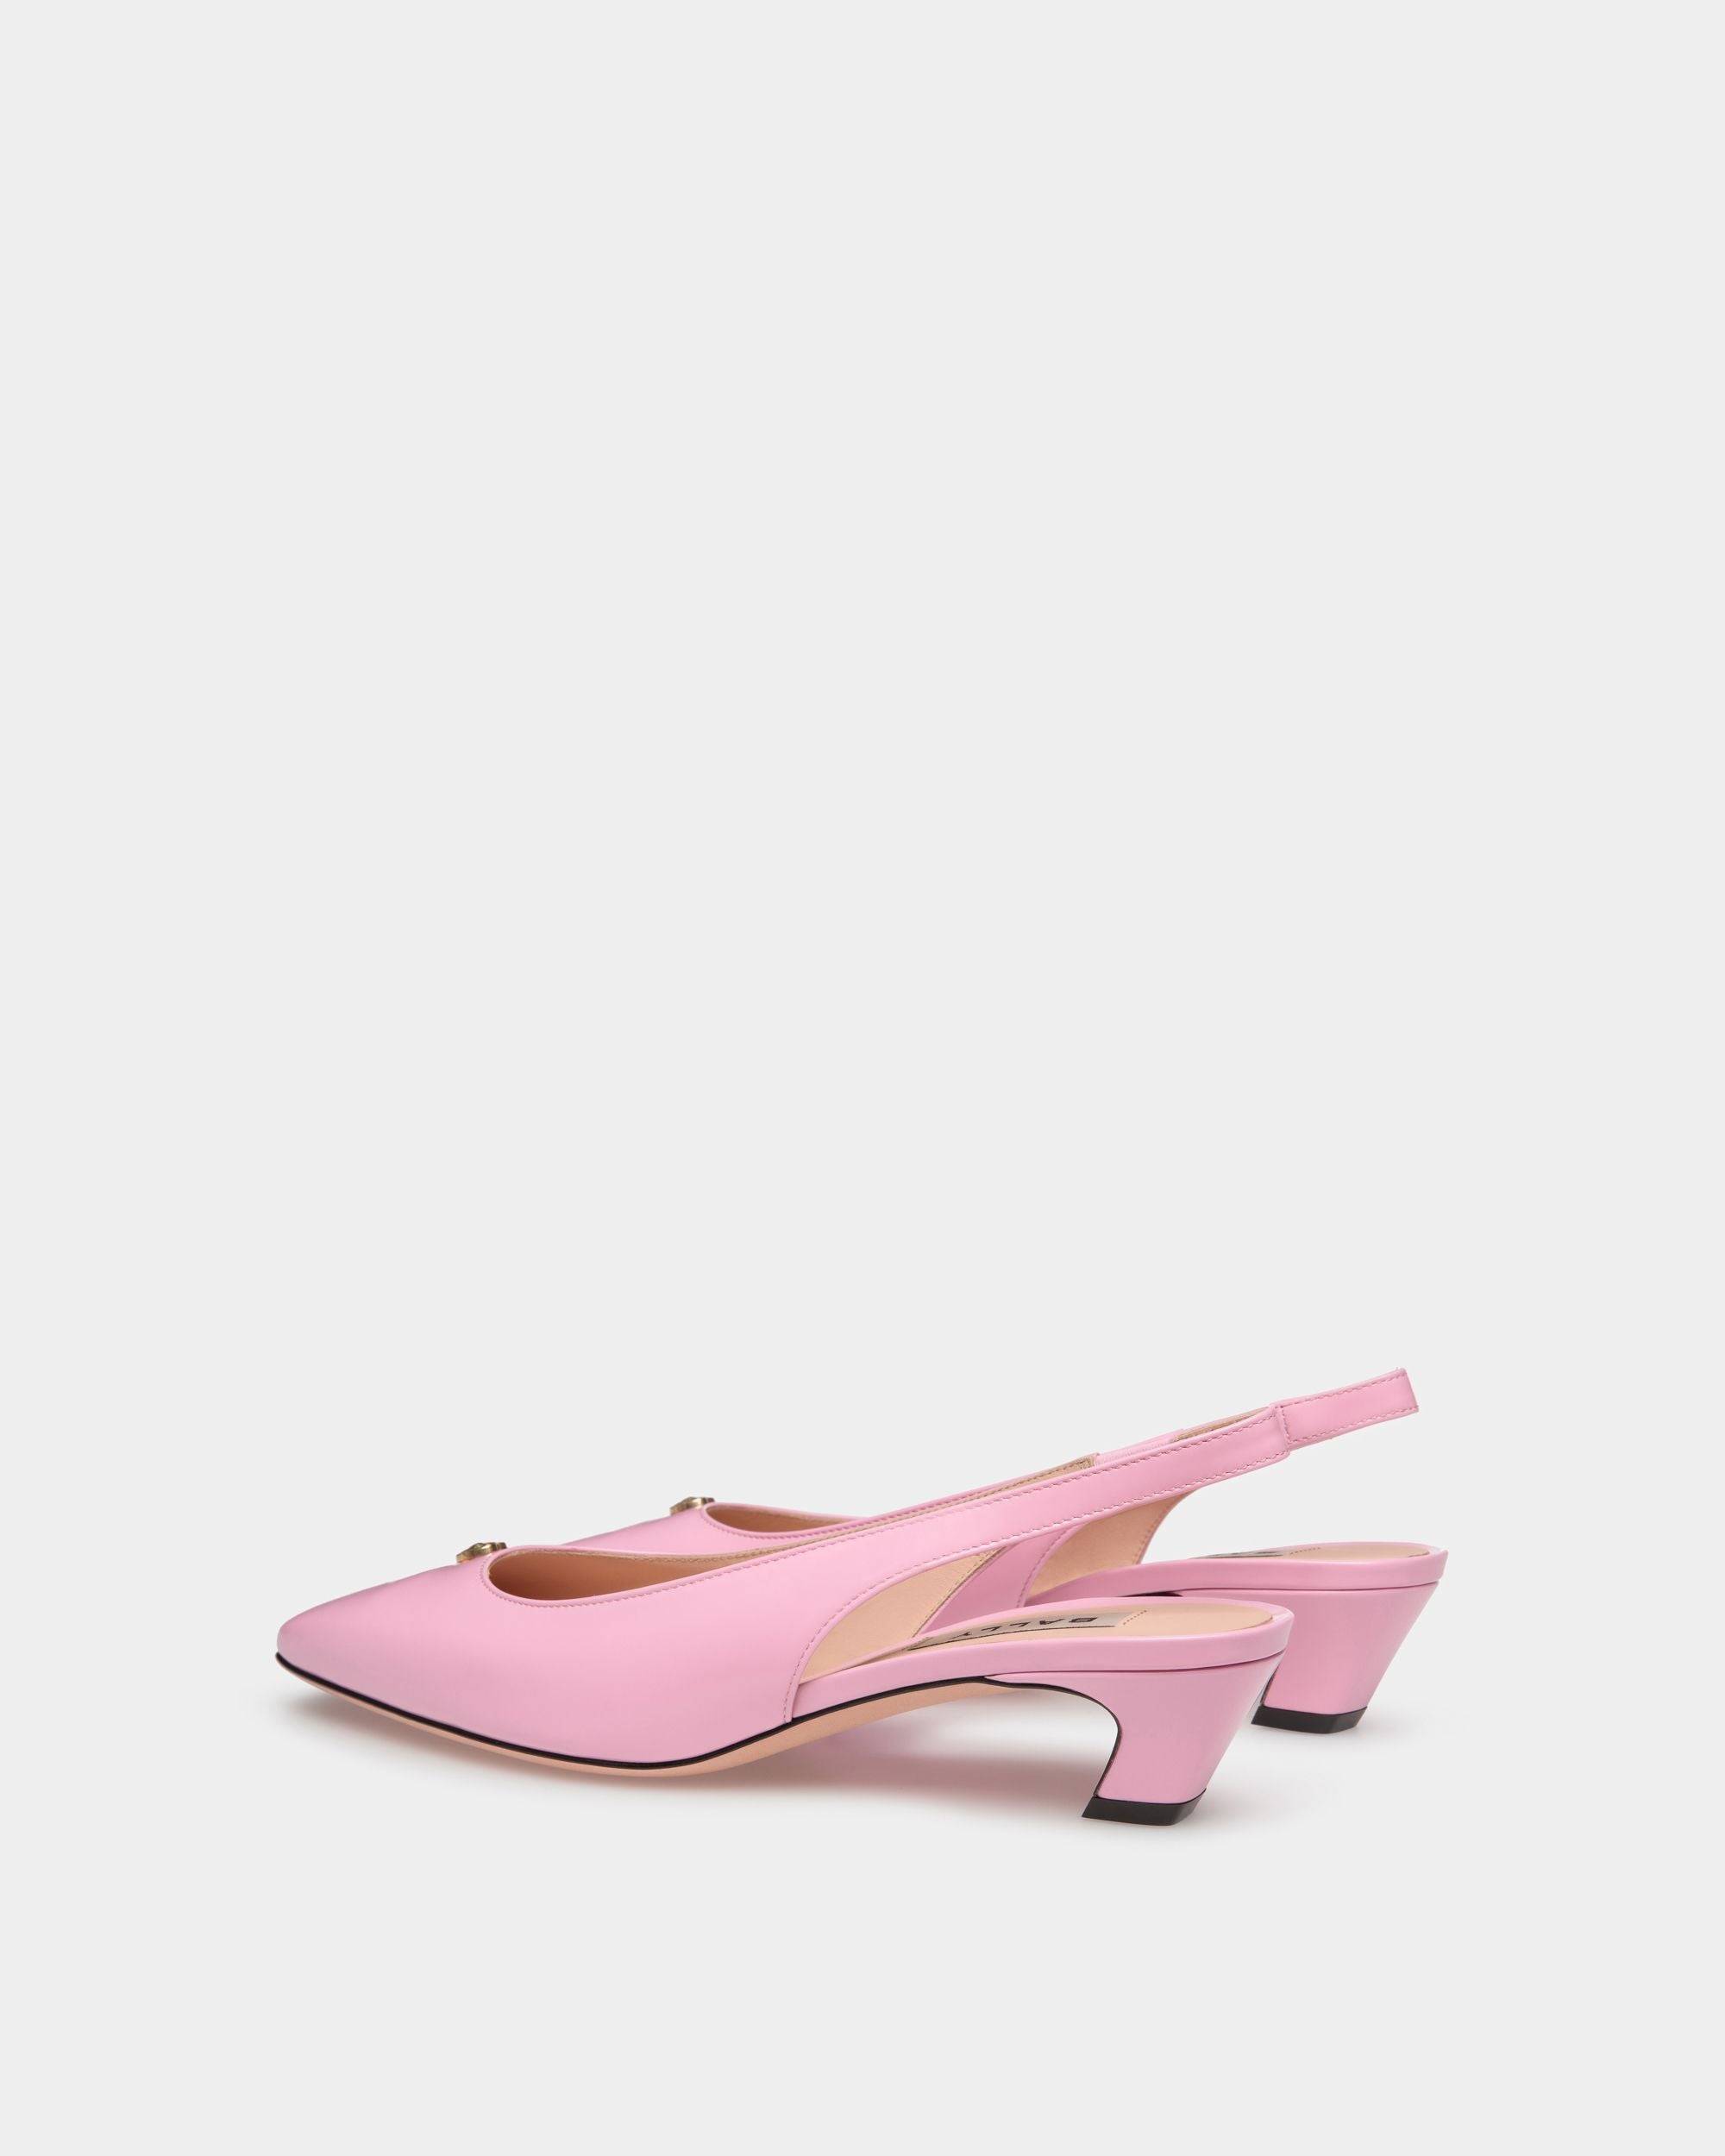 Sylt | Women's Slingback Pump in Pink Leather | Bally | Still Life 3/4 Back